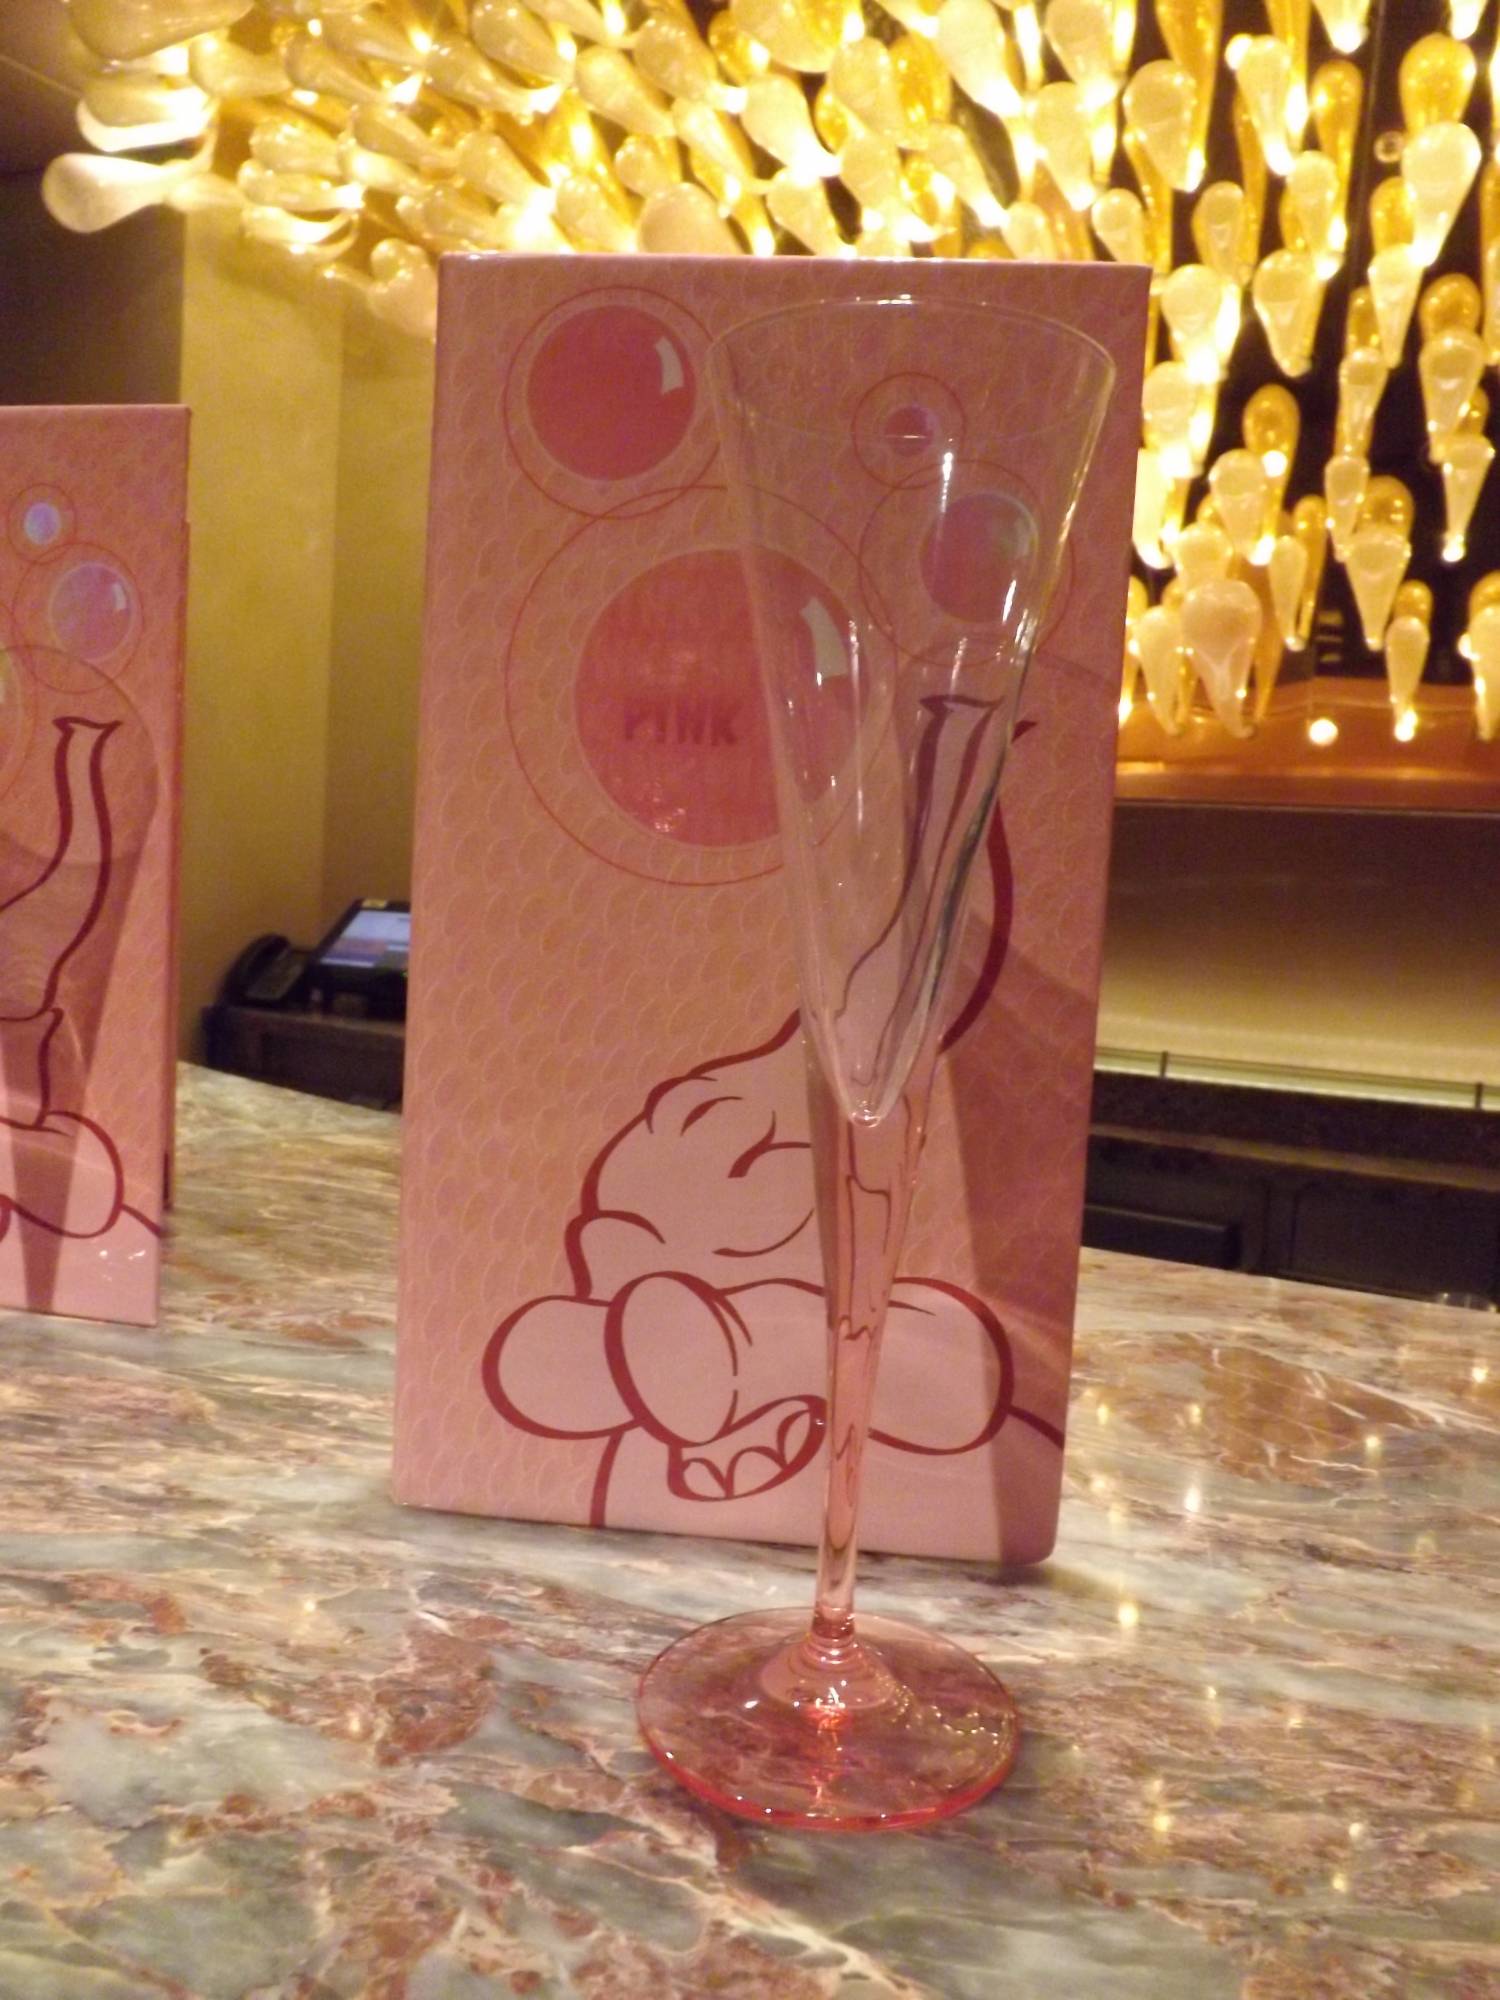 Relax and enjoy a bit of bubbly in 'Pink' onboard the Disney Dream |PassPorter.com